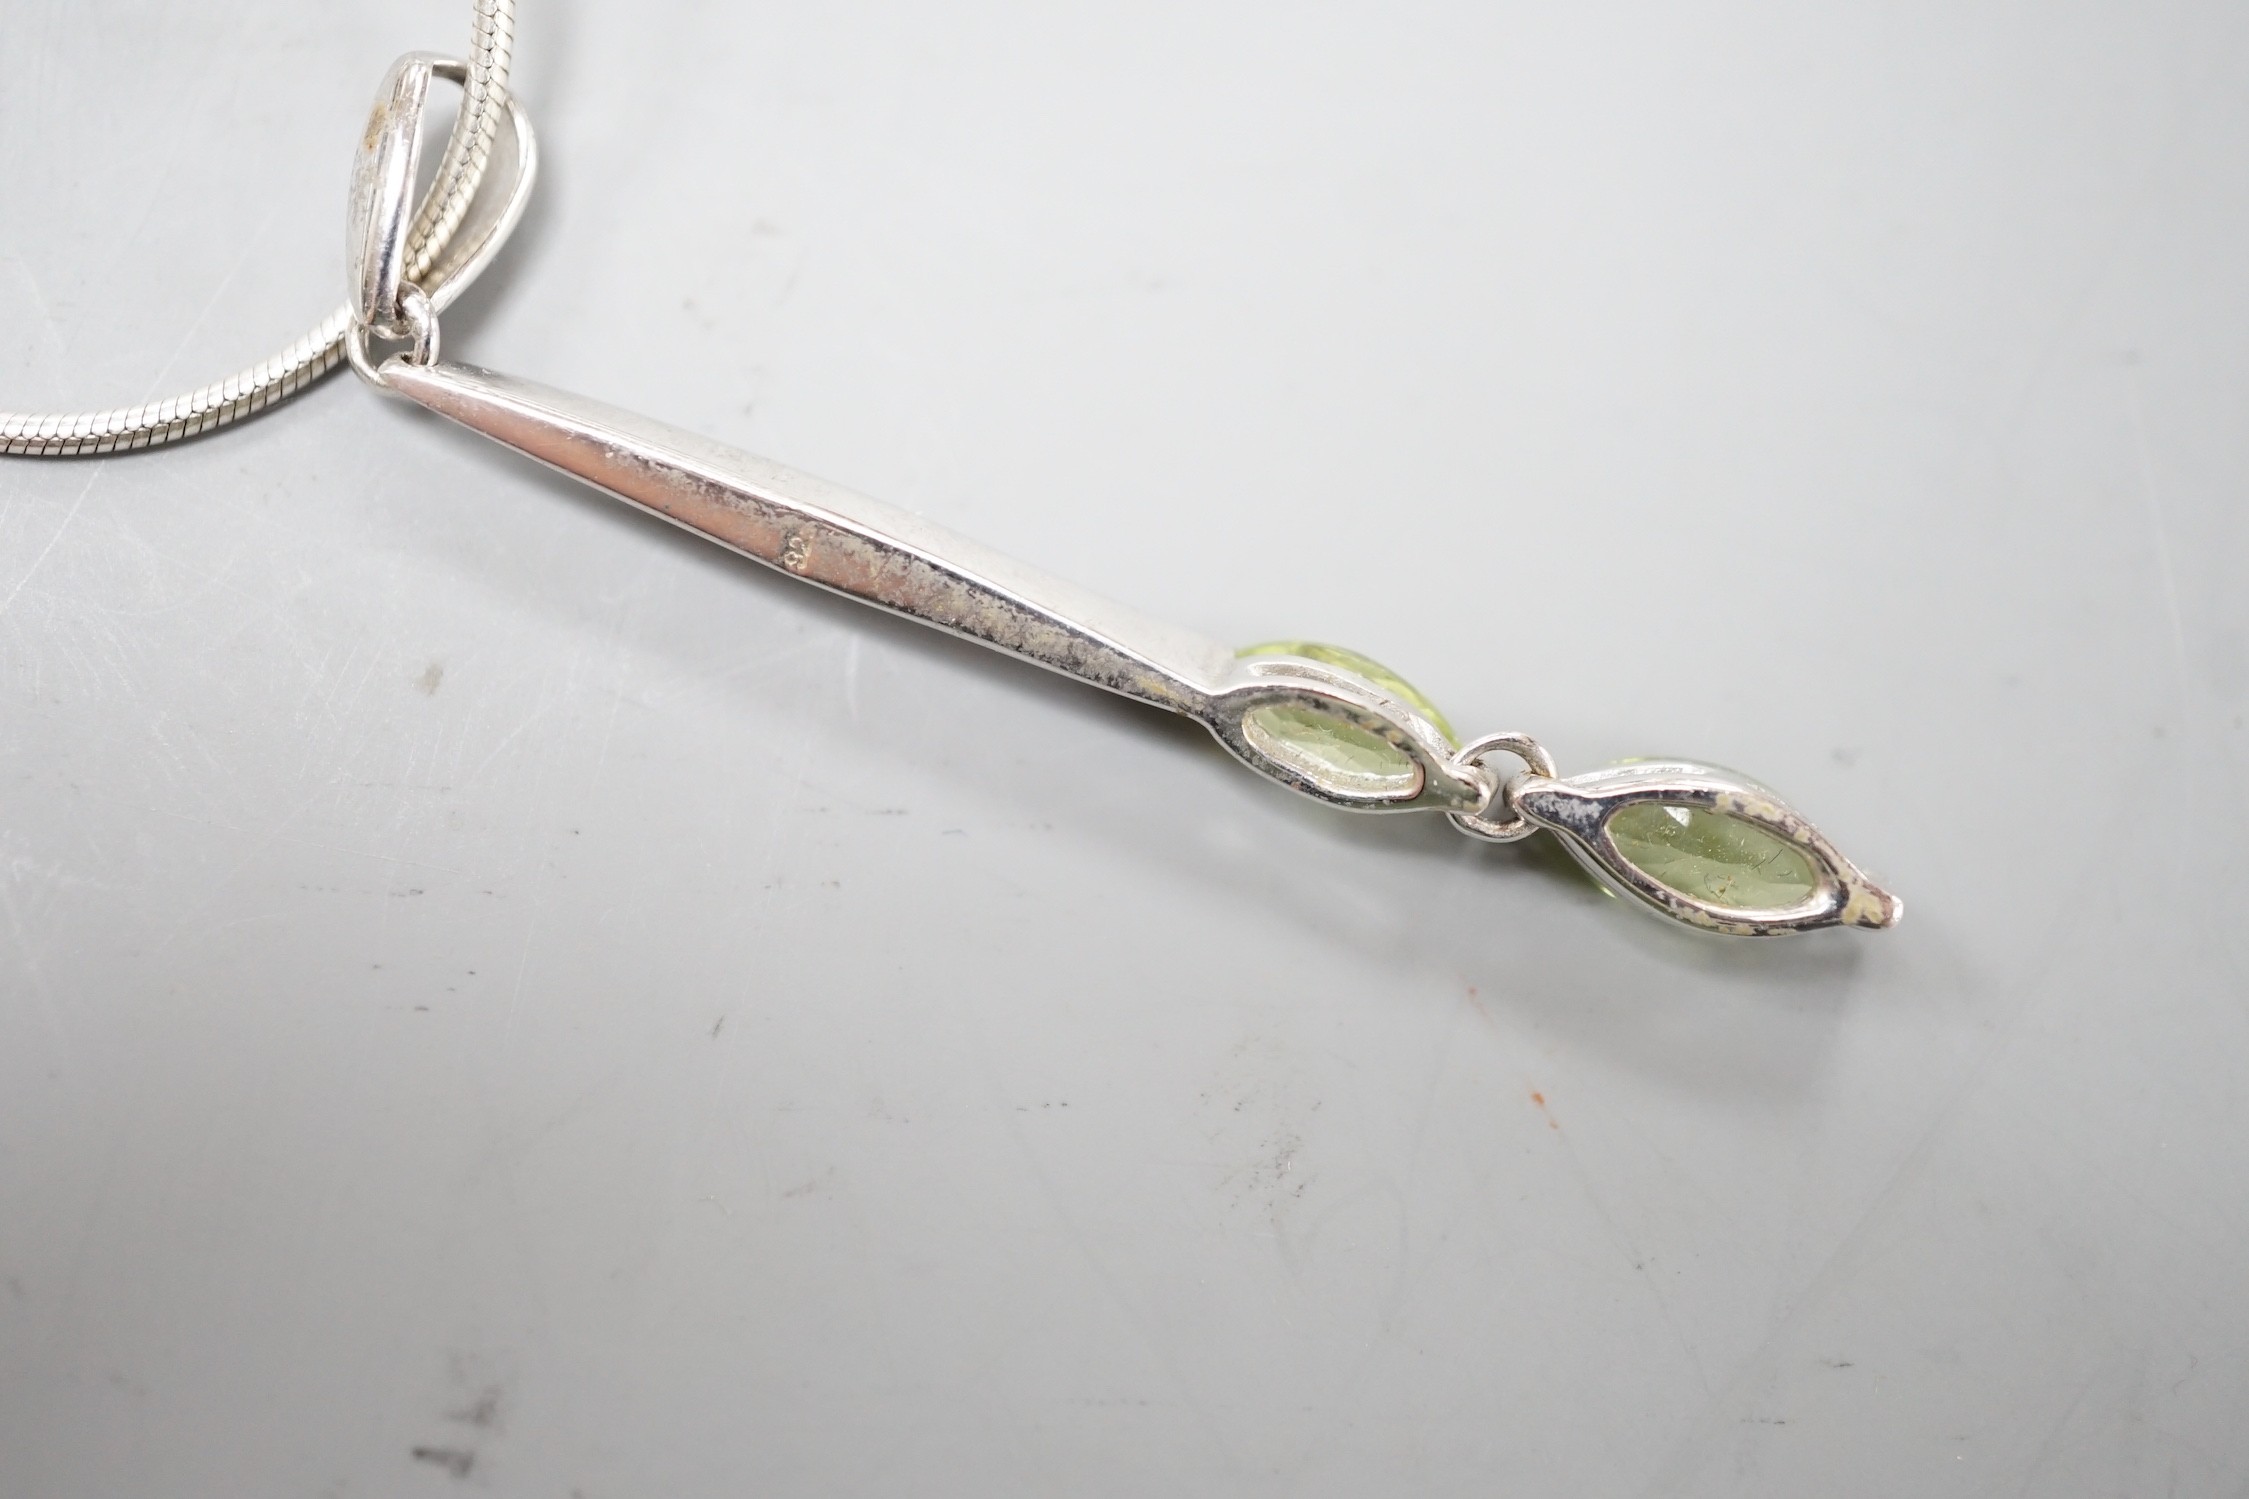 A modern 925 and two stone peridot set pendant,53mm, on a 925 chain, 42cm. - Image 3 of 3